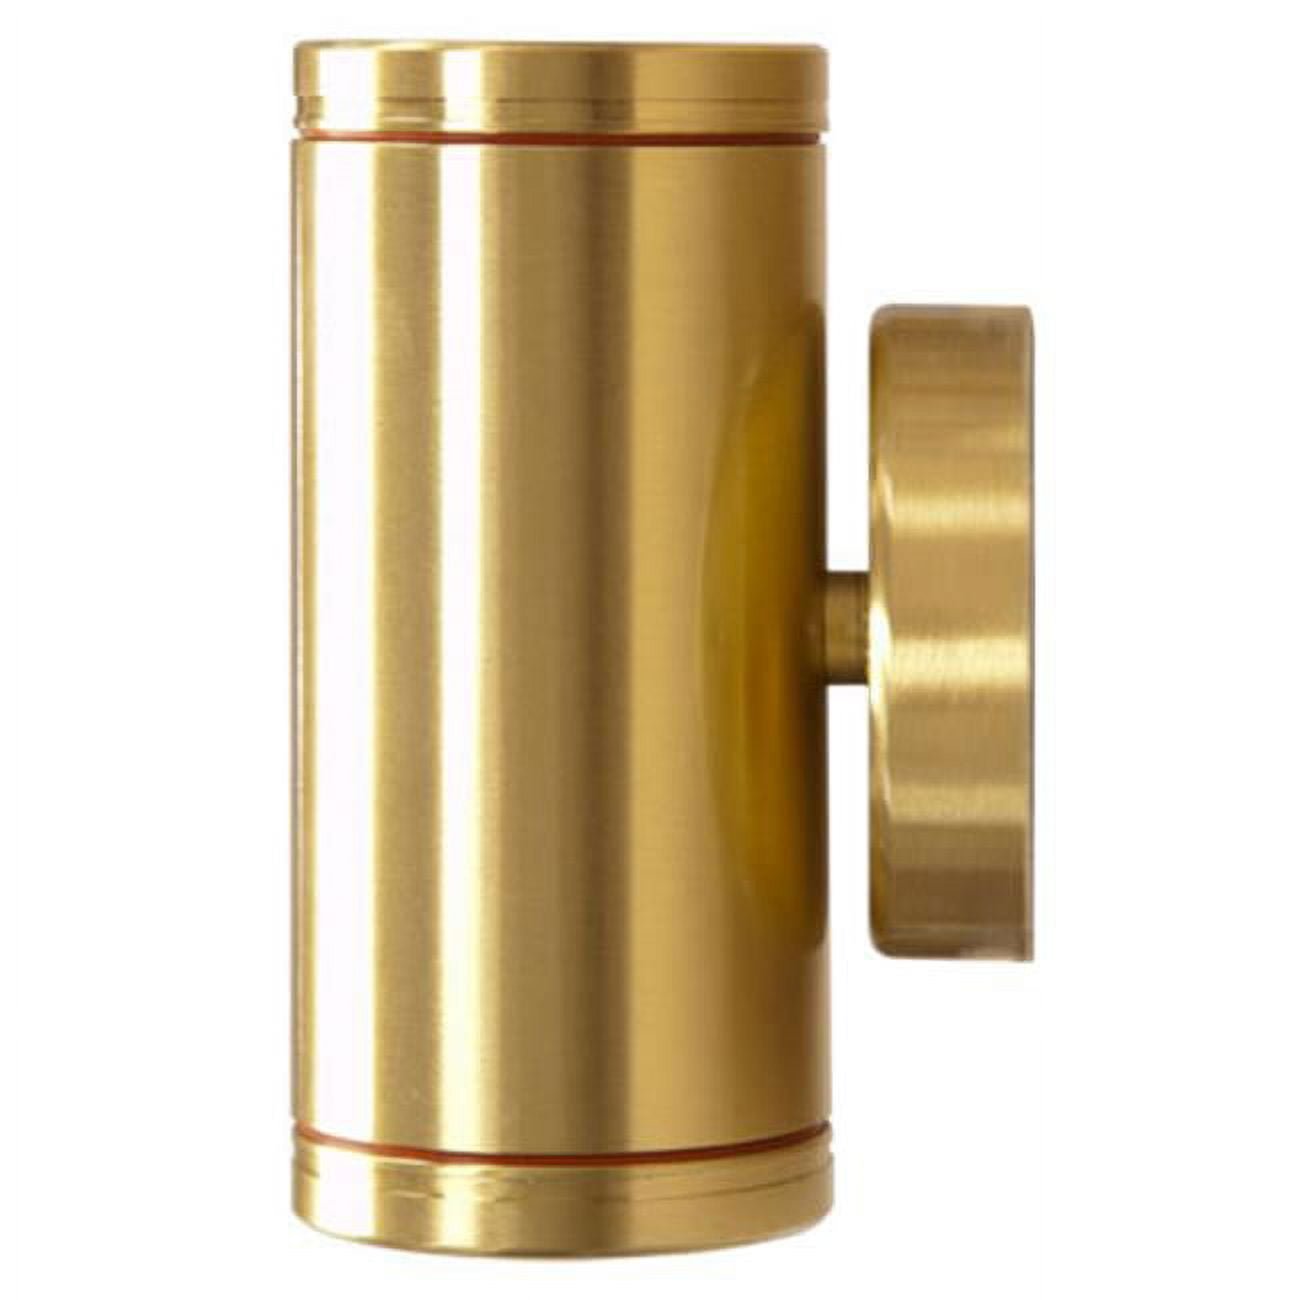 Picture of Dabmar Lighting LV65-BS Brass Surface Mount Up-Down Brick, Step, Wall & Deck Light, Brass - 5.38 x 3.02 x 3.35 in.